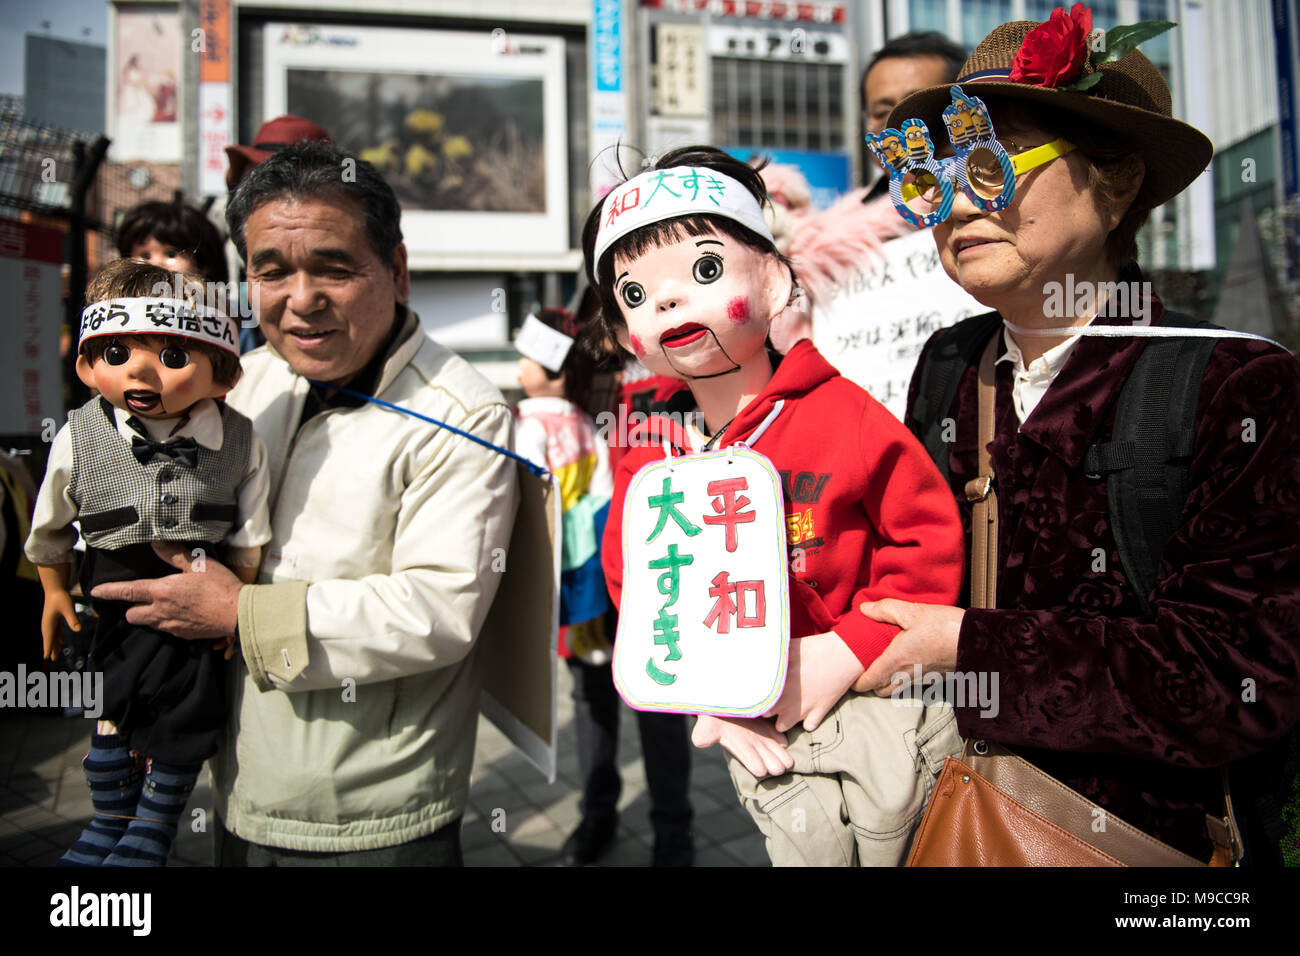 TOKYO, JAPAN - MARCH 24 : A group of puppet doll owners stage a rally to protest against the U.S base presence in Japan on March 24, 2018 in Tokyo, Japan. The protests are part of wider demonstrations on the island against the government plans to go ahead with the relocation of the US Marine Corps Air Station Futenma to the Henoko district of Nago, Okinawa Prefecture. (Photo: Richard A. de Guzman/AFLO) Stock Photo